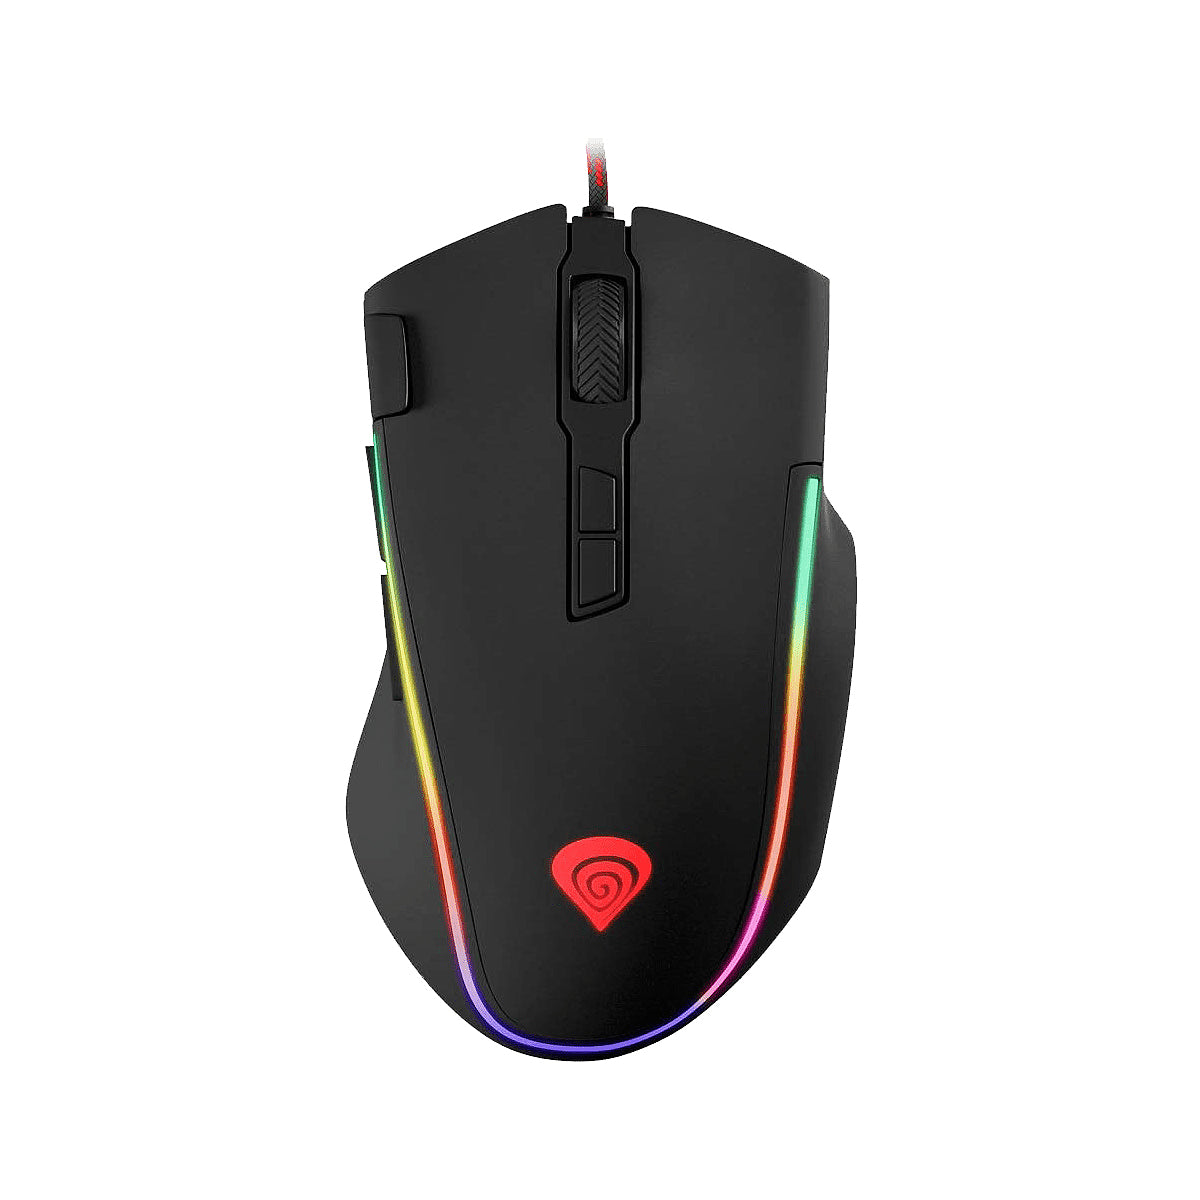 Genesis Krypton 700 NMG-0905 Optical Gaming Mouse (New) Best laptop mouse, computer mouse, gaming mouse, professional mouse, mouse for sale in Lebanon, mouse in Lebanon, RGB mouse, laptops king lebanon